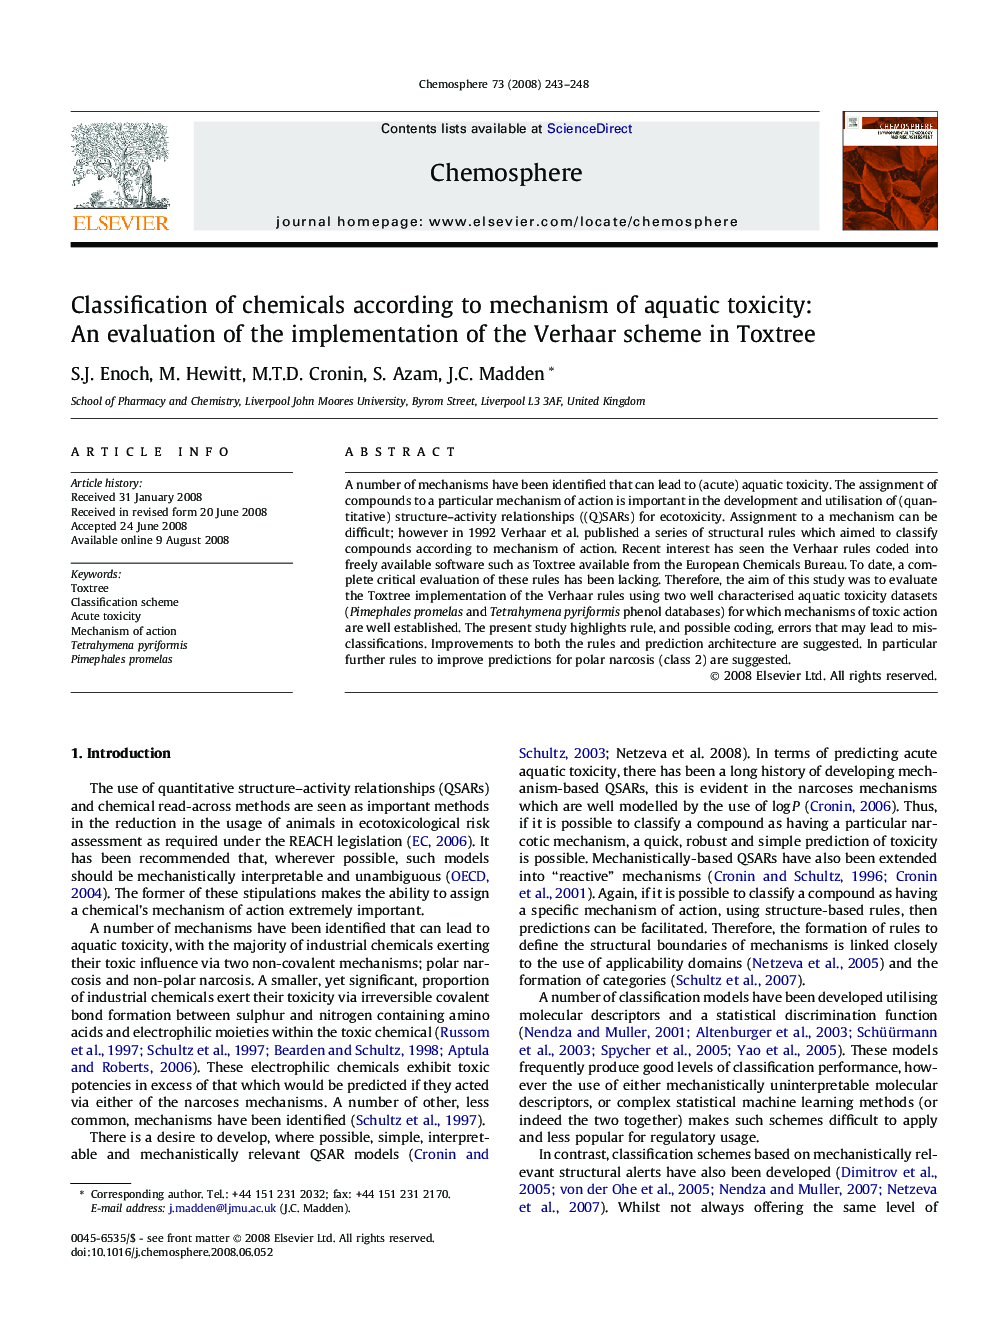 Classification of chemicals according to mechanism of aquatic toxicity: An evaluation of the implementation of the Verhaar scheme in Toxtree